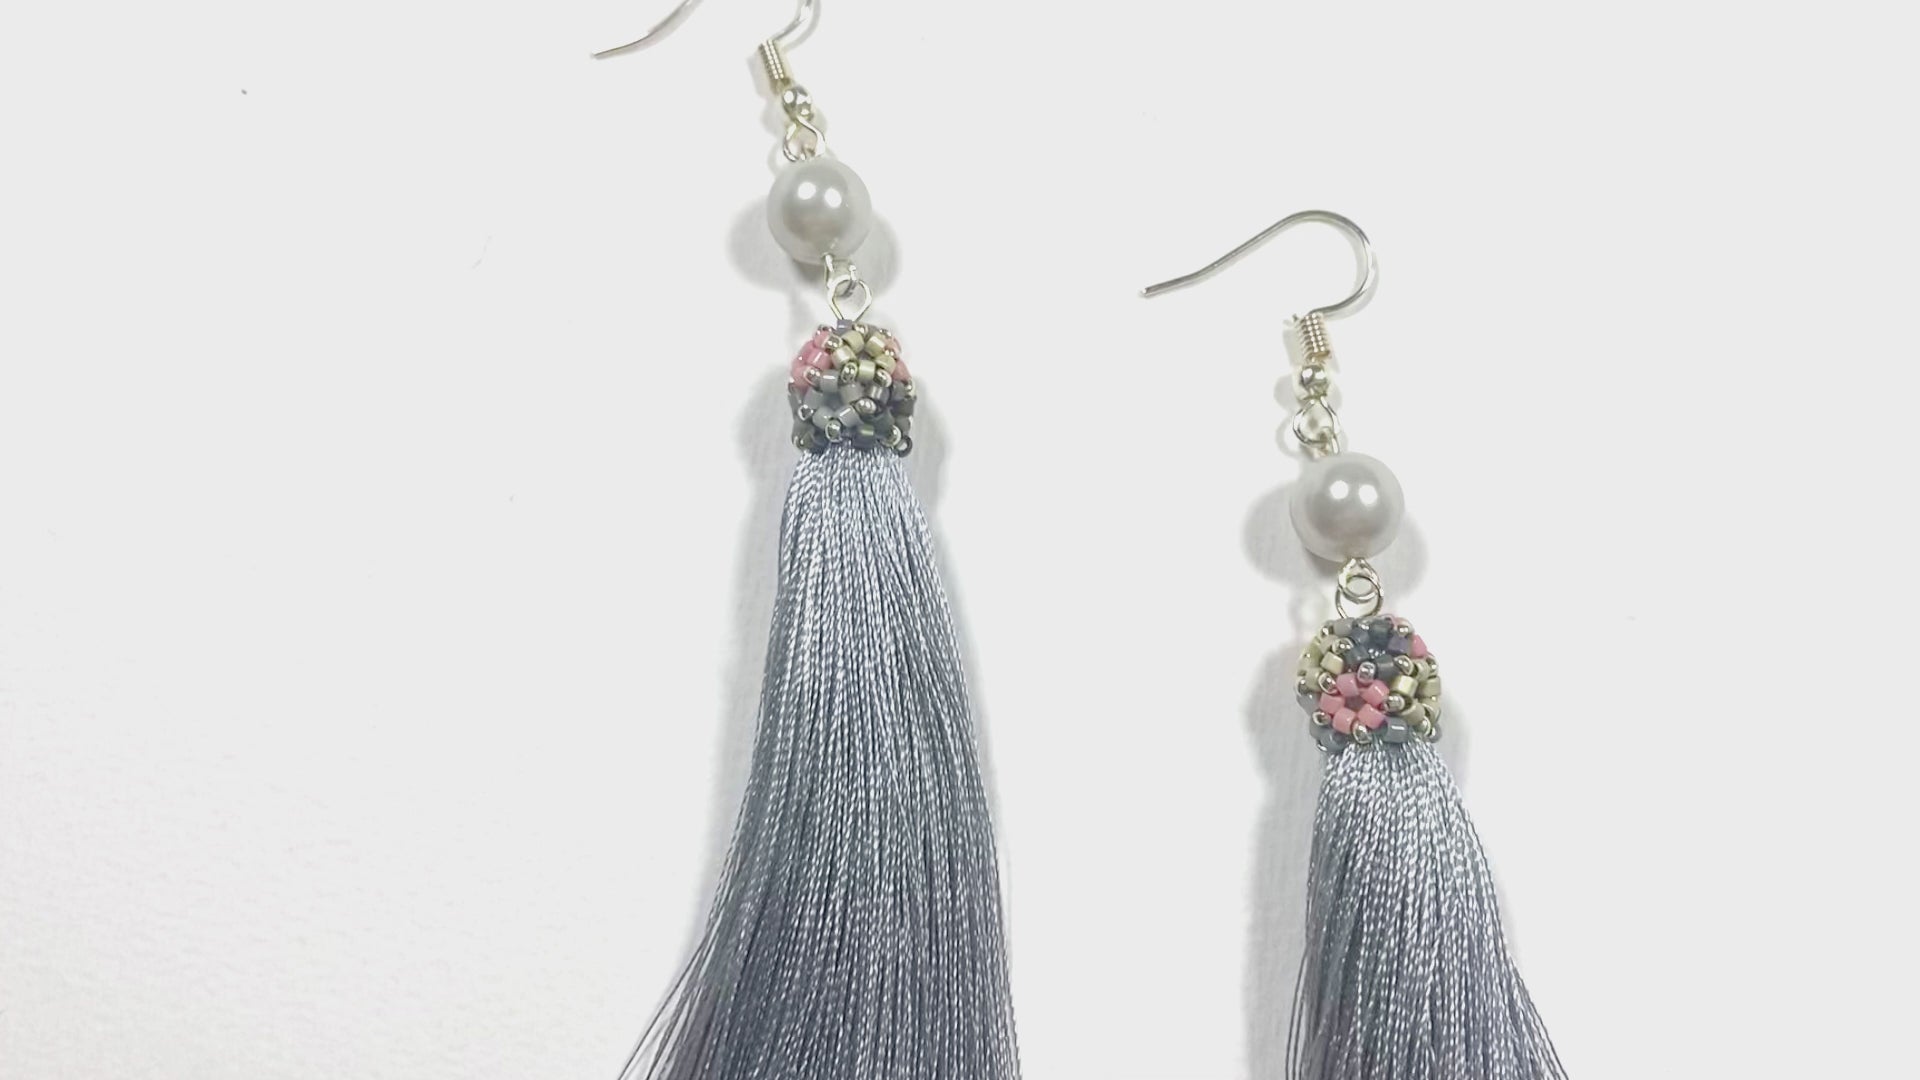 Handmade earrings are crafted from shimmering silver grey tassel which is covered with a floral cap from beads - Ornamentico shop